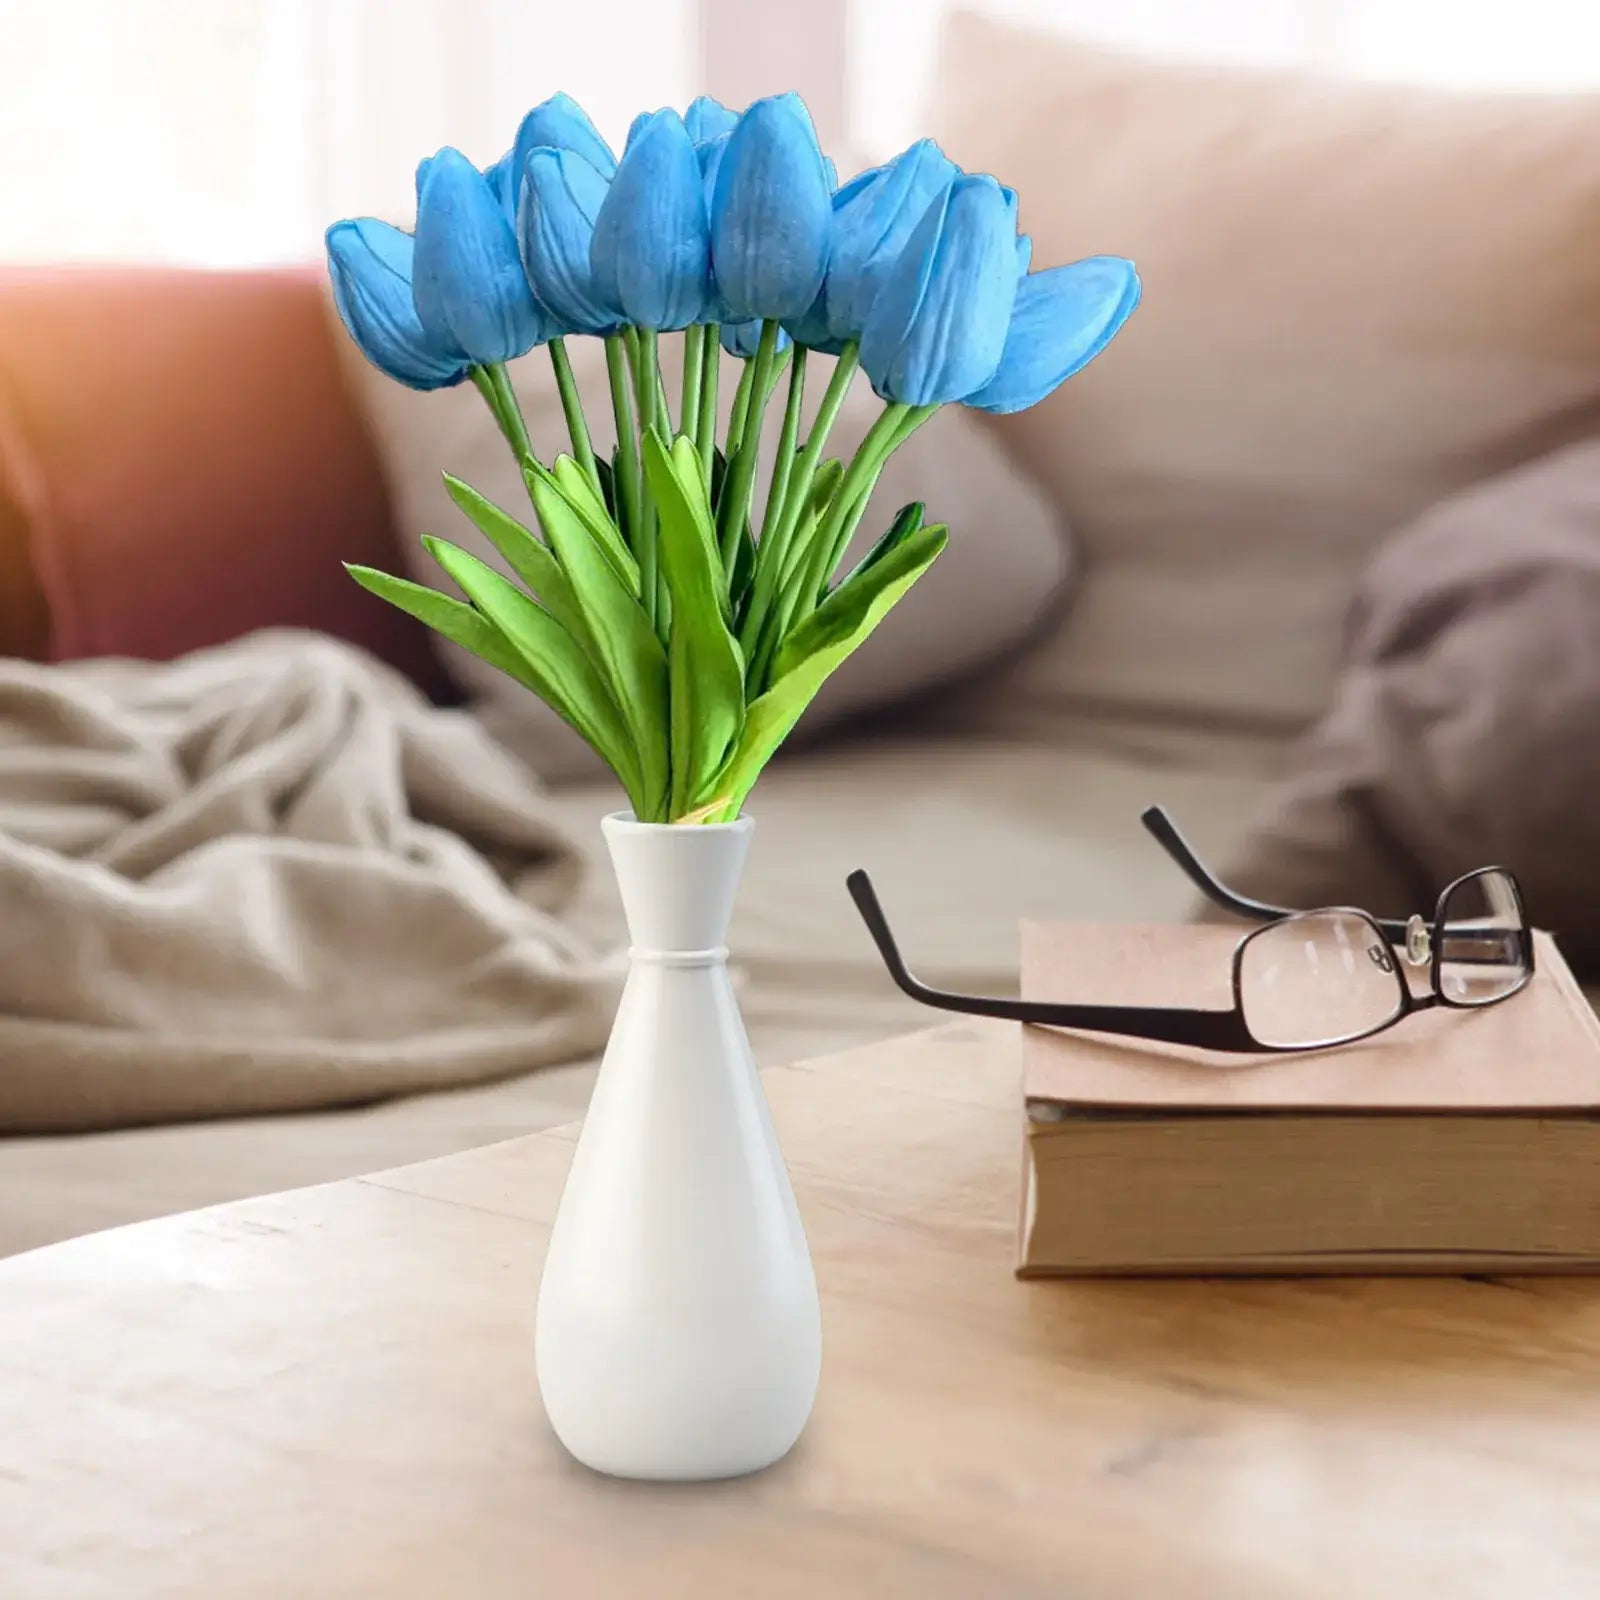 Blue Artificial Tulips - 13.8 inches / 35 cm long - 12 Flowers. Shop Artificial Flowers on Mounteen. Worldwide shipping available.